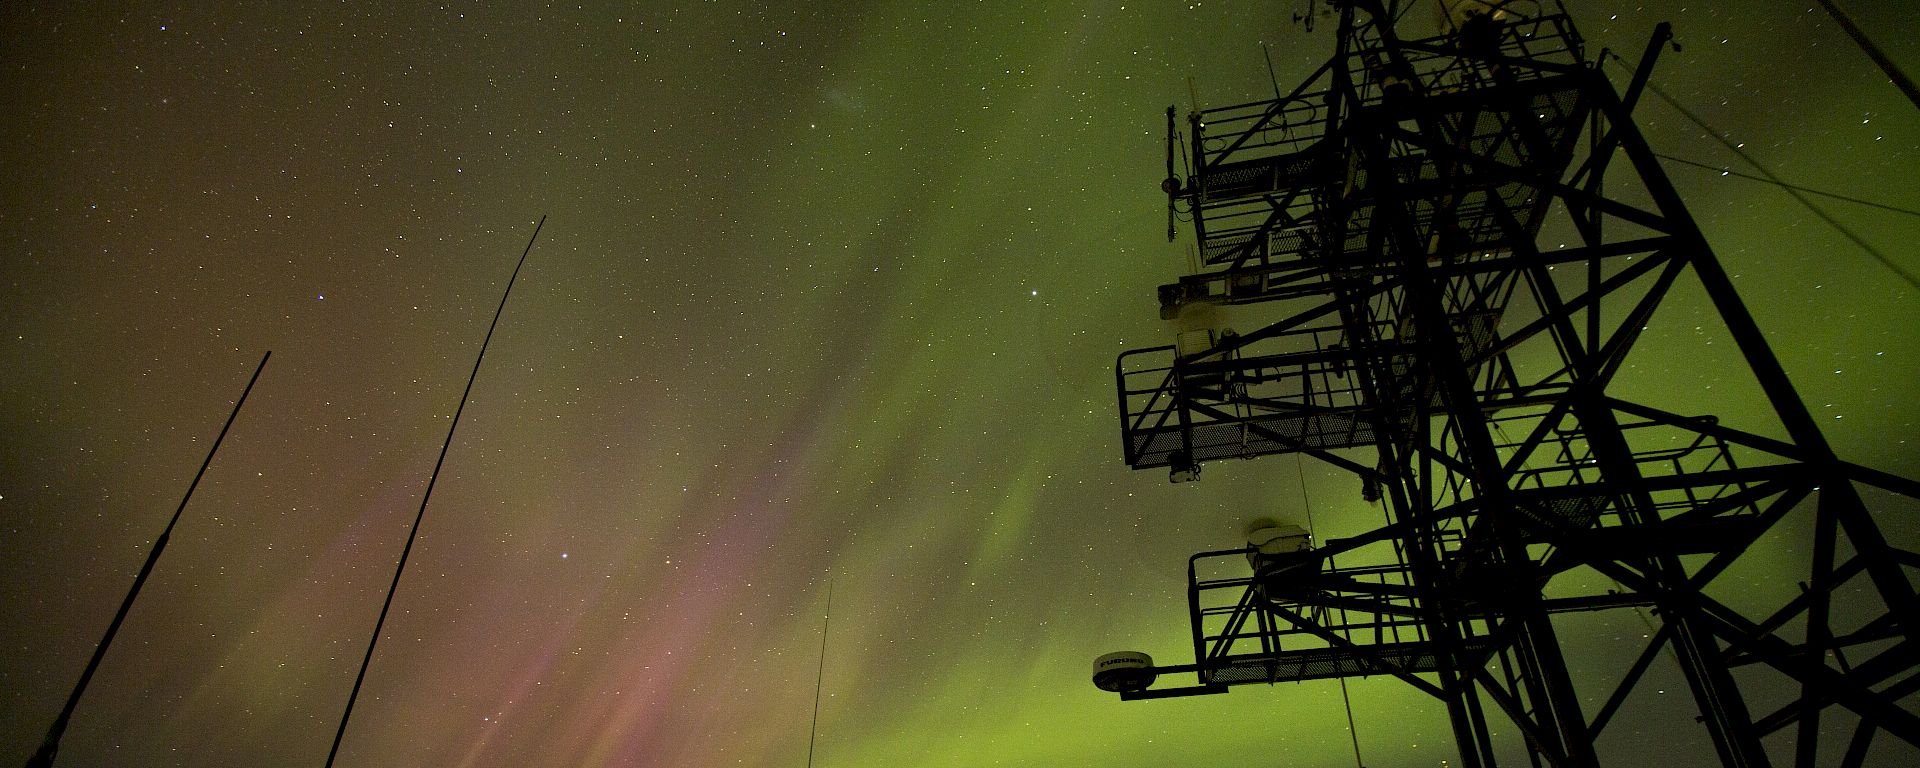 Green and pink aurora viewed from ship with silhouettes of antennae and masts.